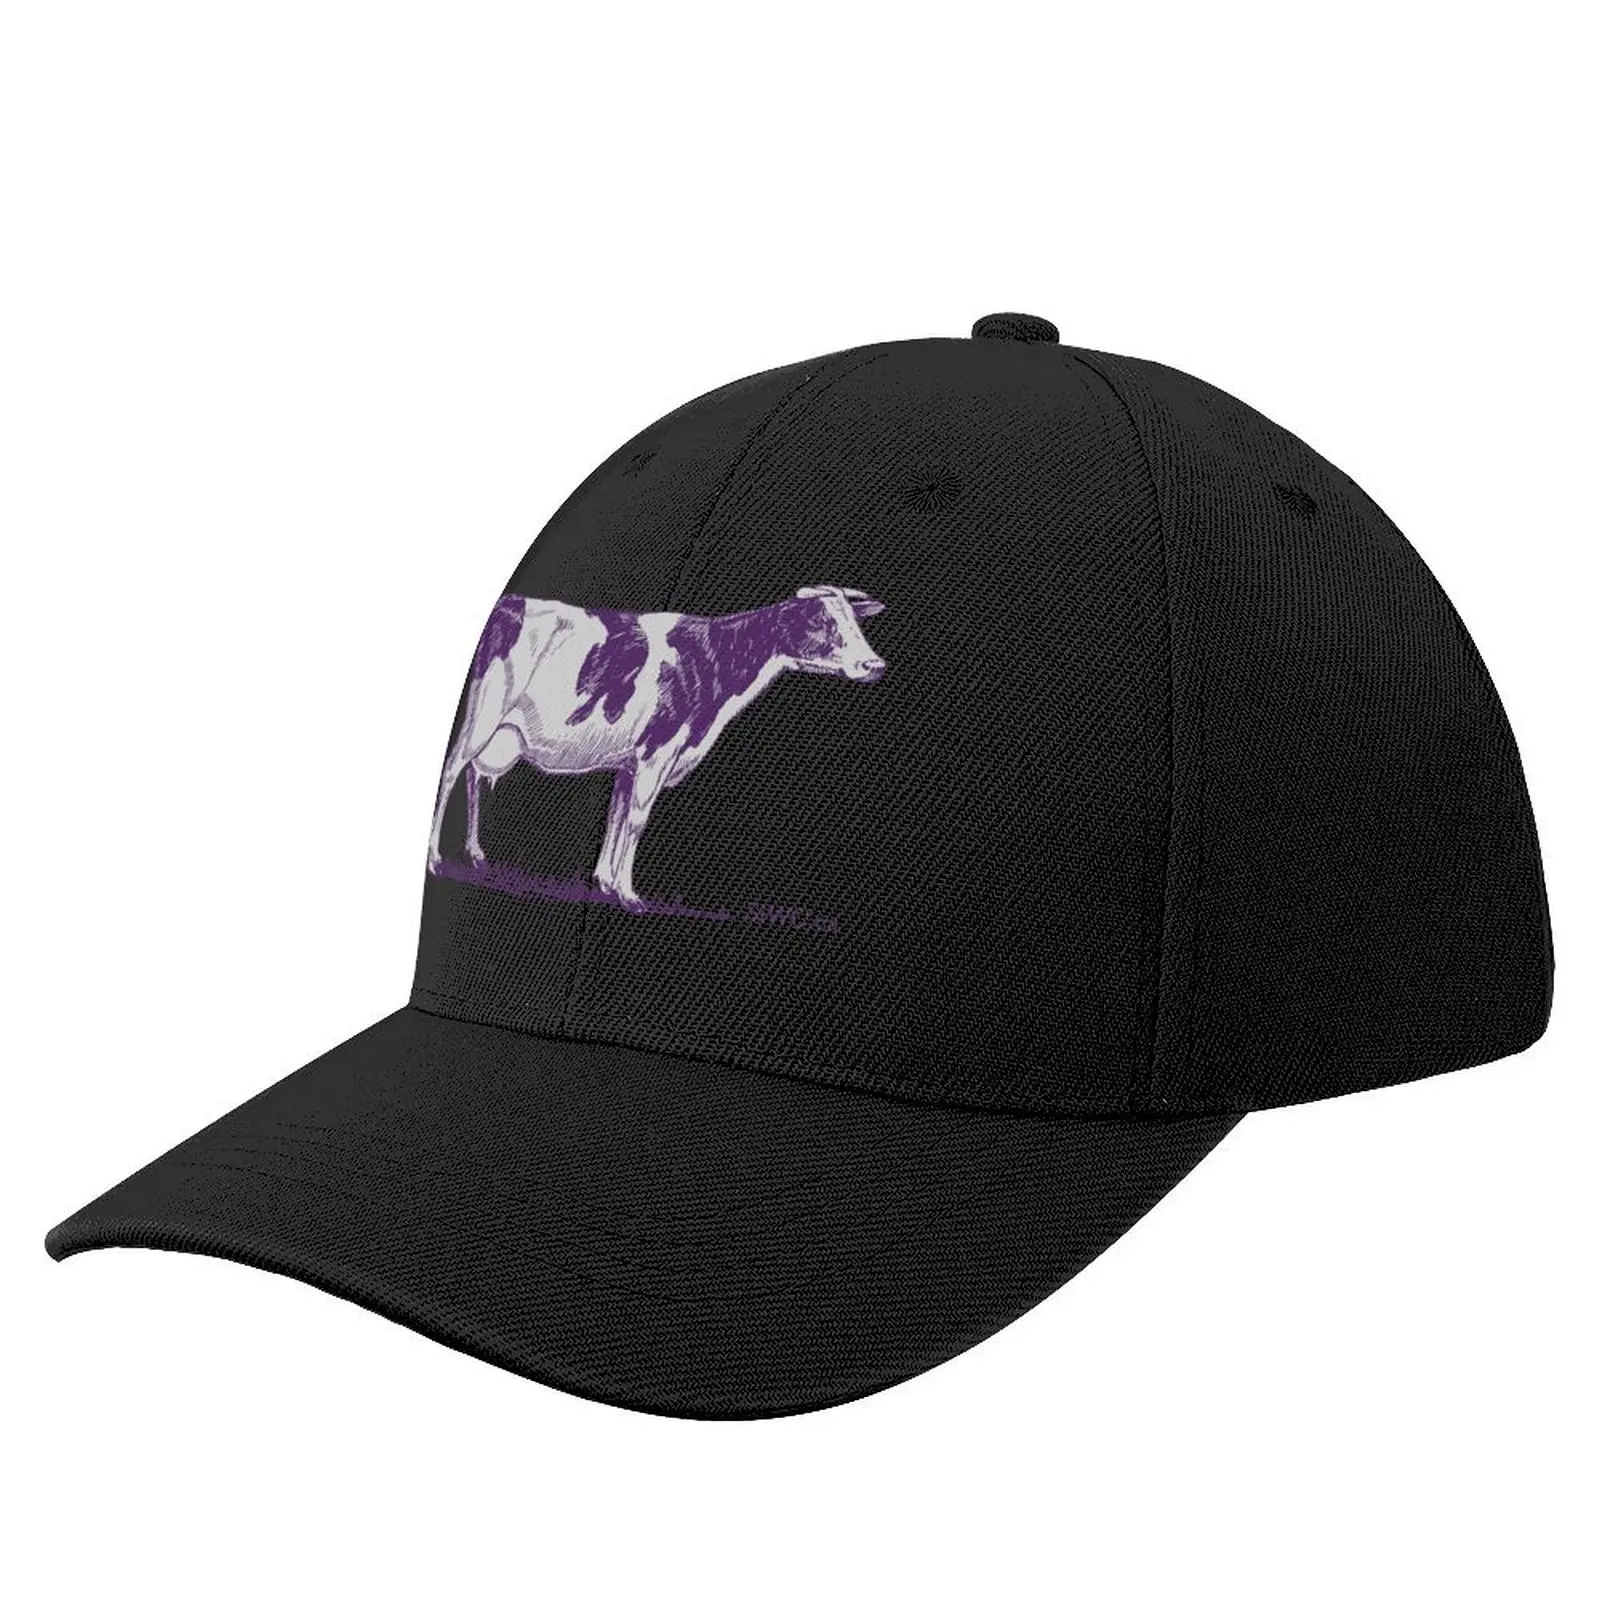 

The Purple Cow Baseball Cap Rugby Vintage Uv Protection Solar Hat Golf Men Women's